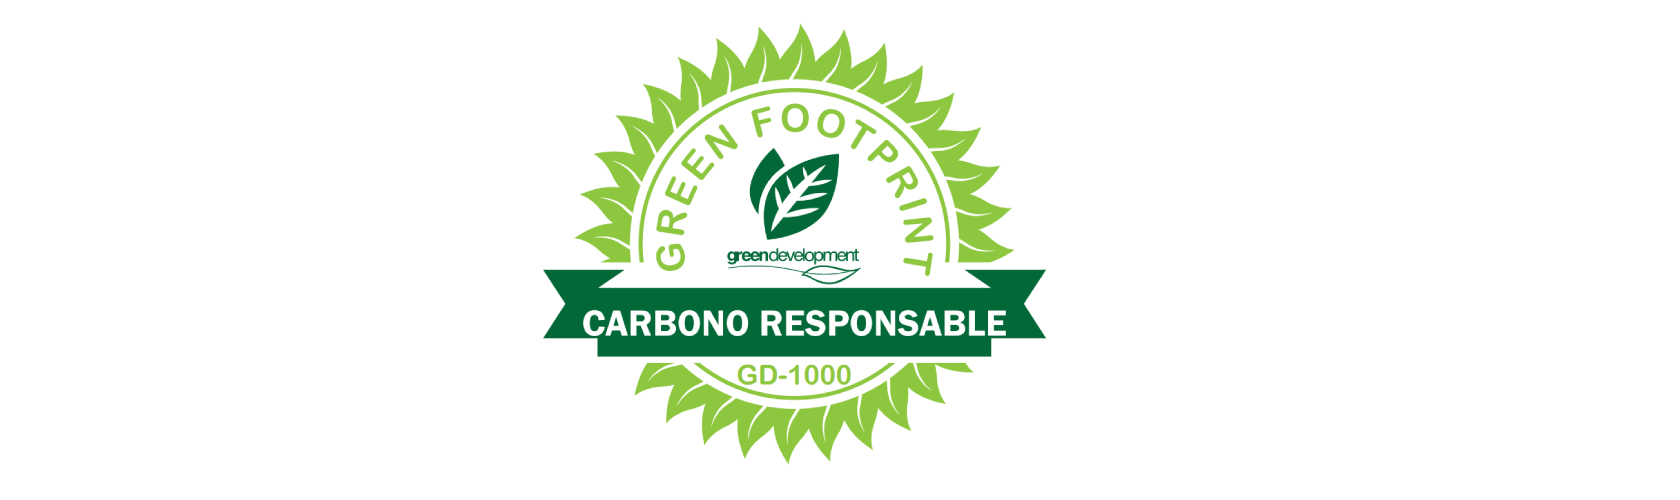 gt_carbono_responsable_0321